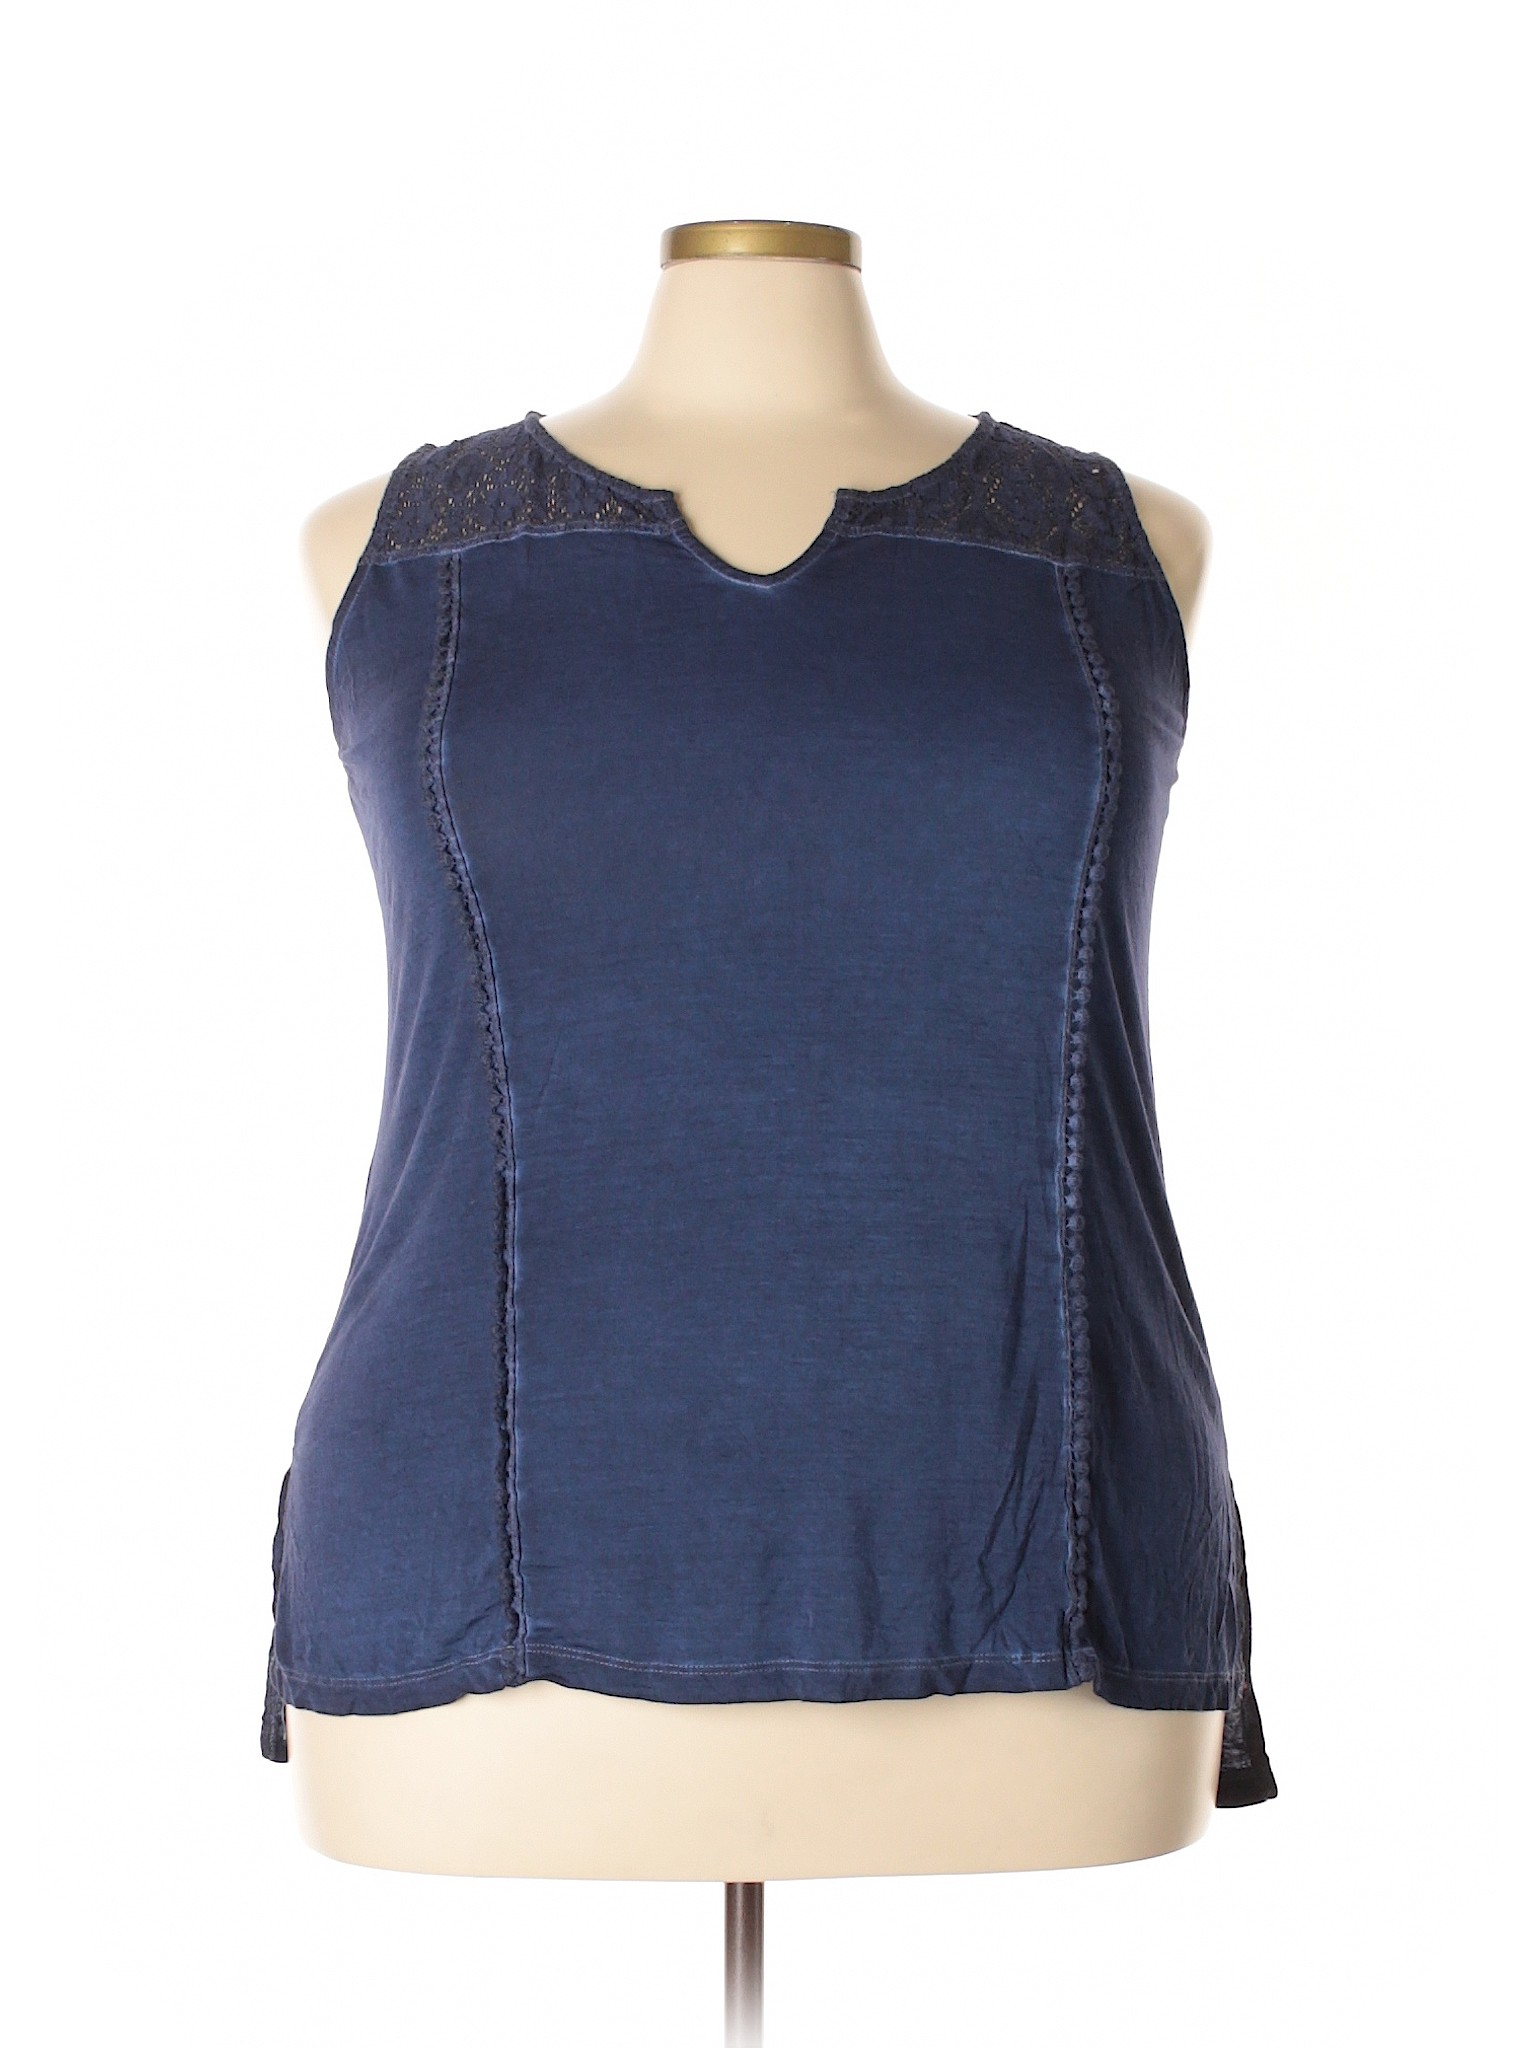 Cable & Gauge Solid Blue Dark Blue Sleeveless Top Size 2X (Plus) - 33% ...